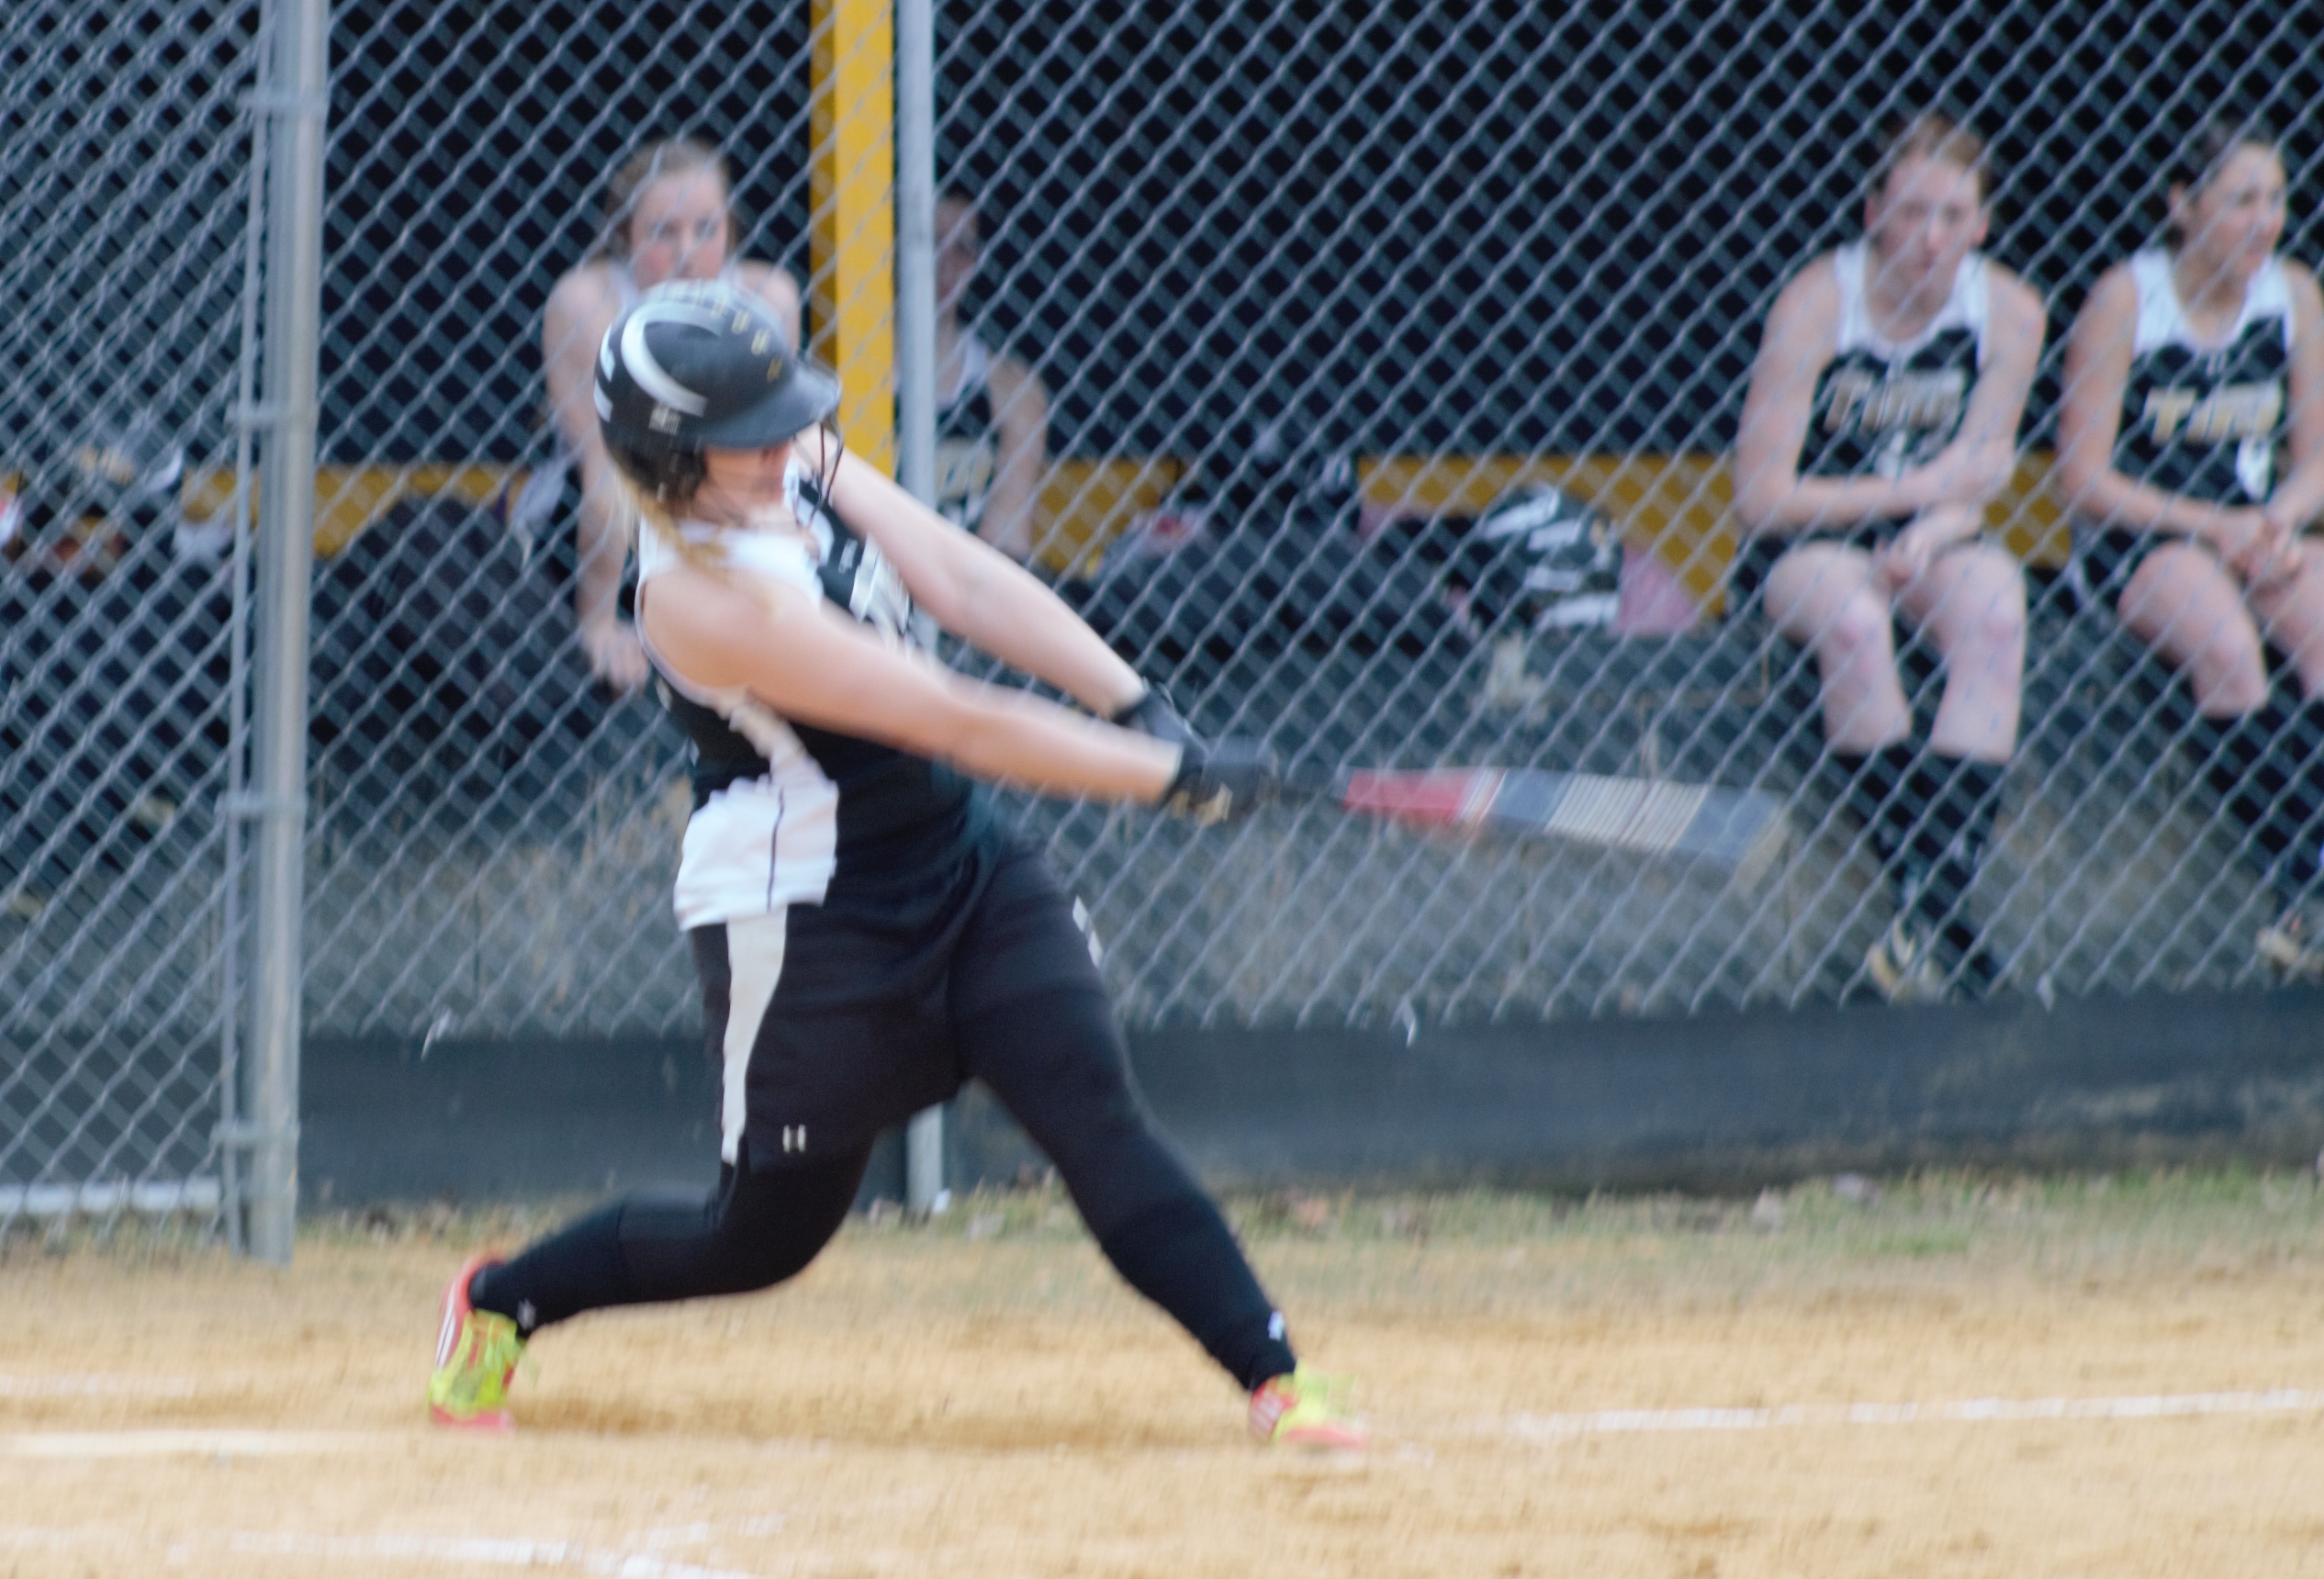 TIFFANY CARTER shows her swing earlier this season.  Carter belted a three-run homer yesterday to help lift the Lady Tide to a 5-0 win over Ridgway